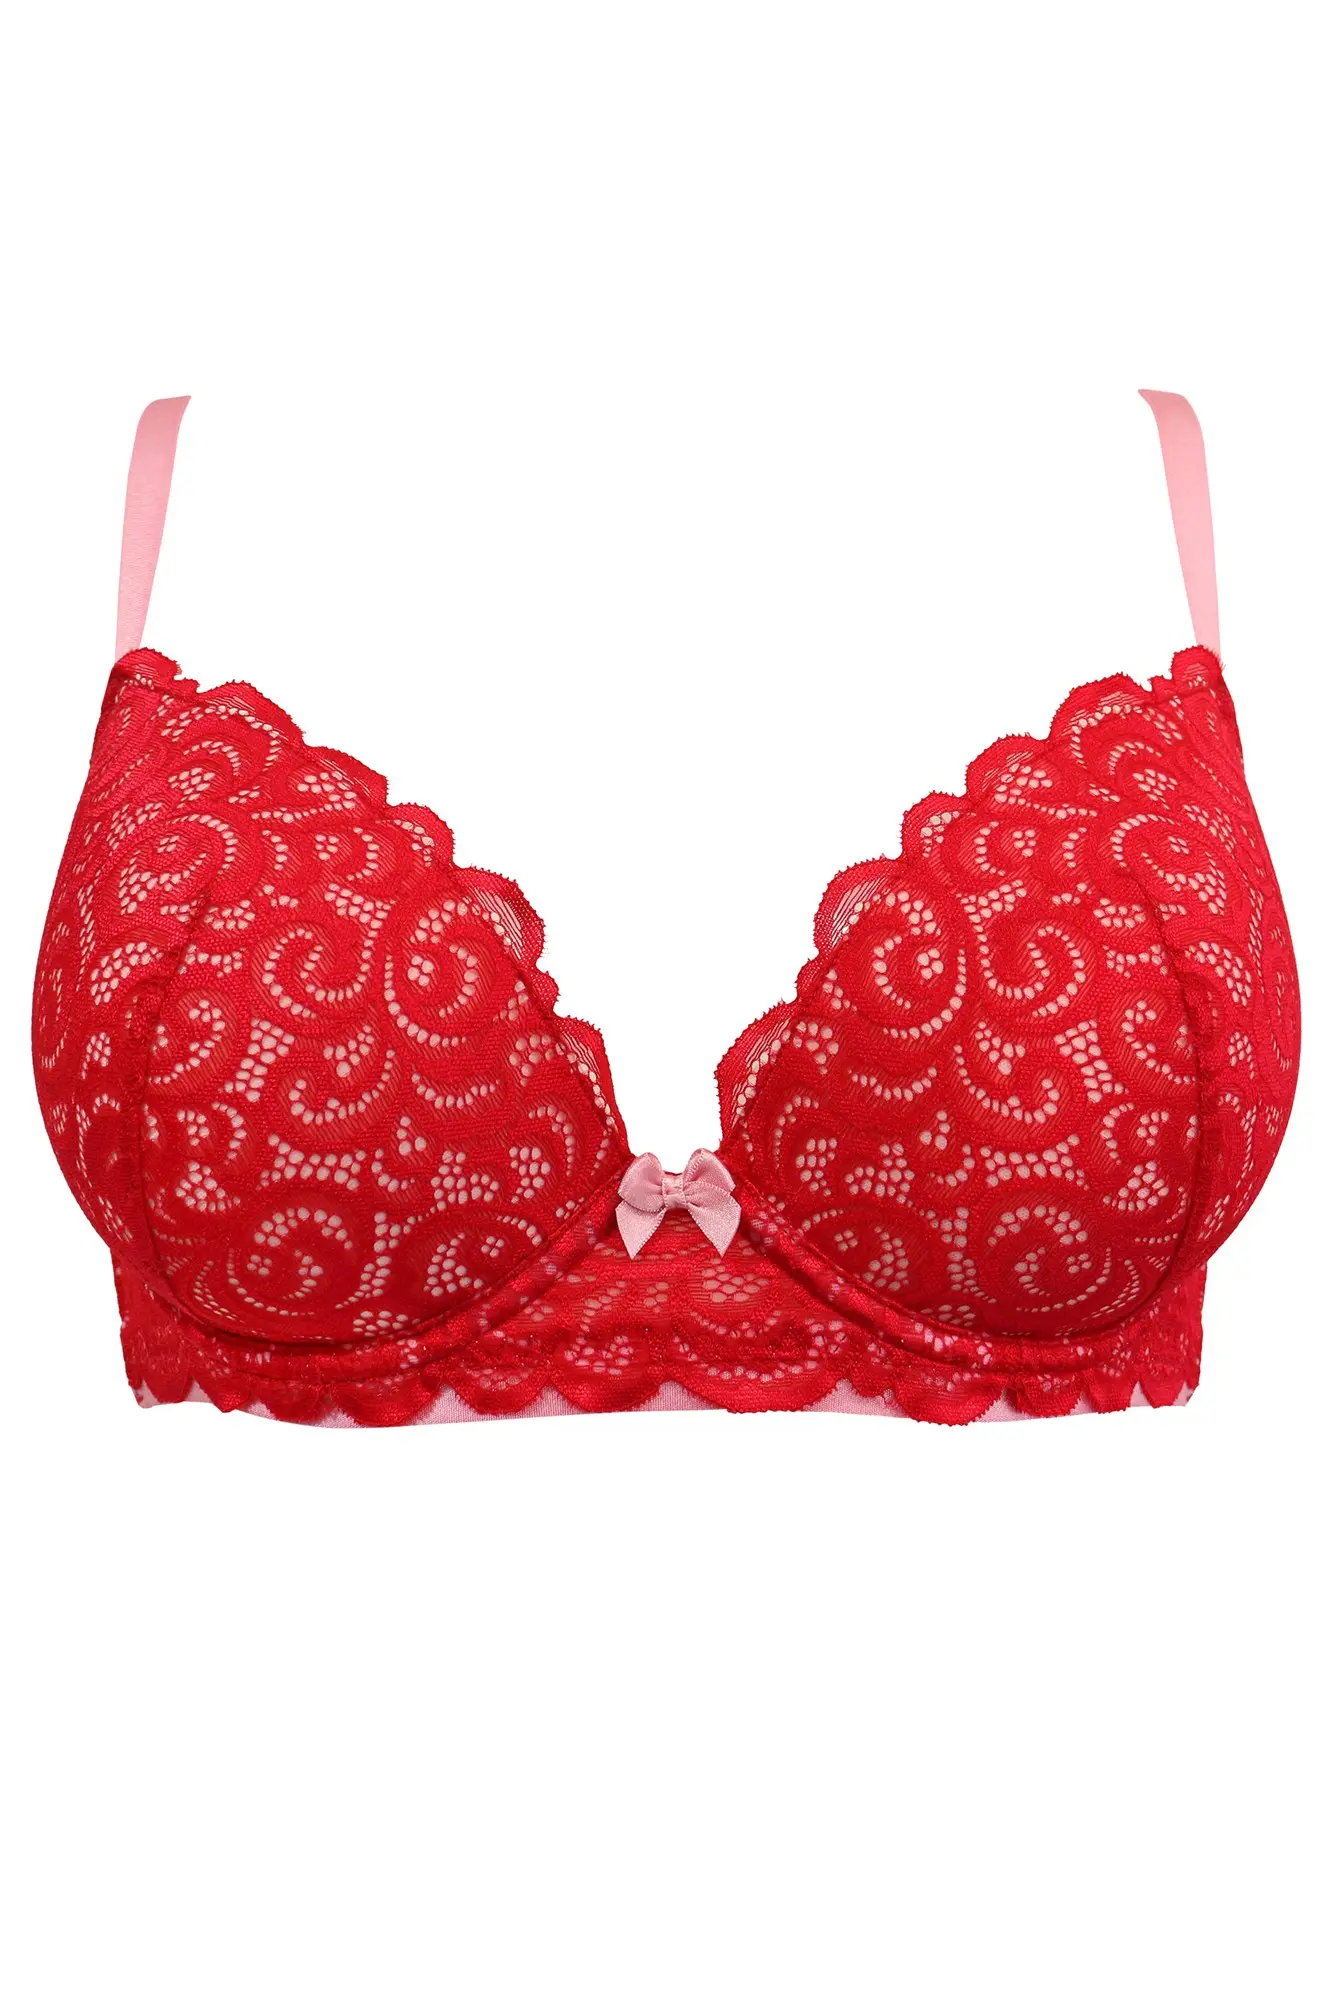 Romance Moulded Padded Push Up Plunge Bra in Red/Pink | Pour Moi Clothing